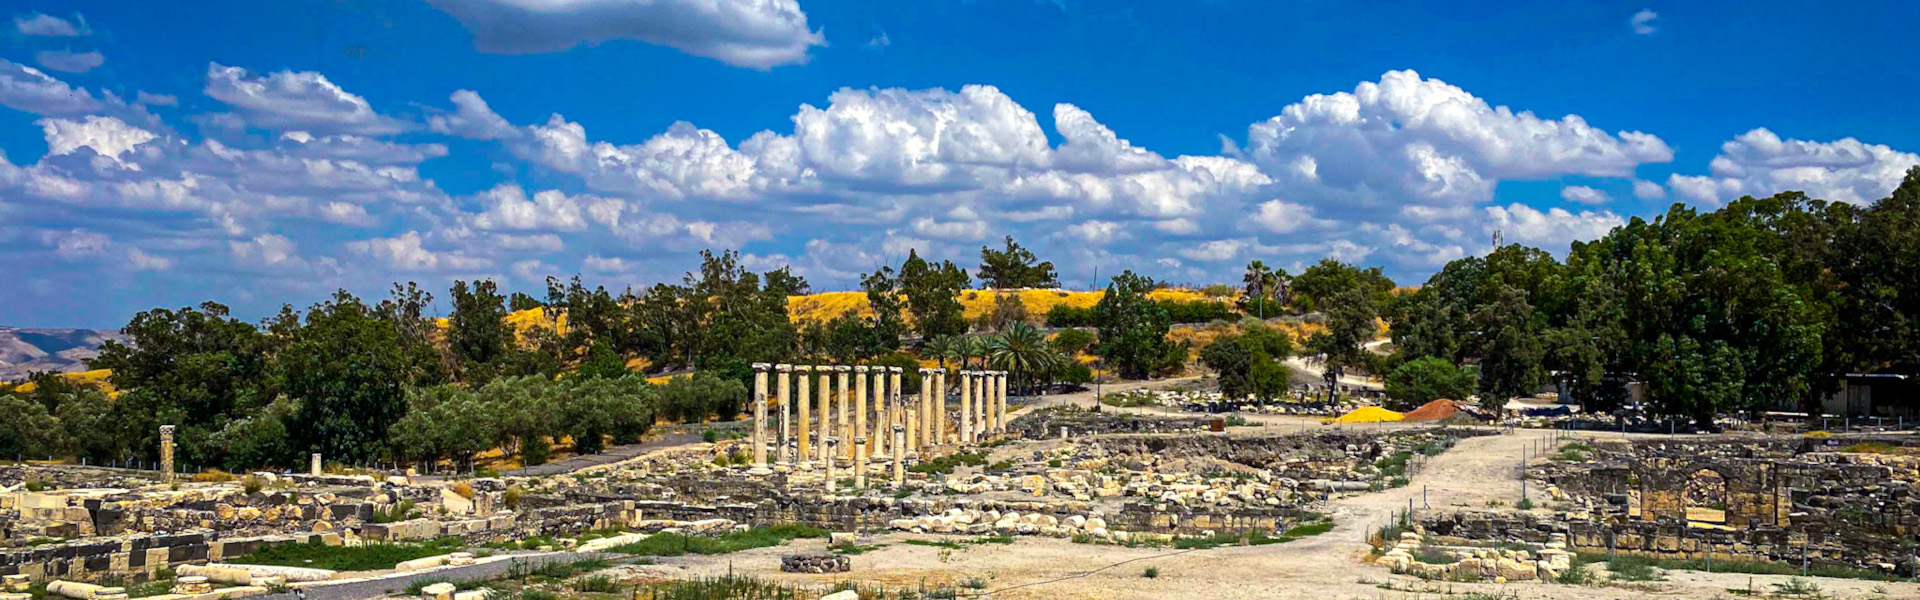 A view of columns at the site of Beit She'an in Israel.